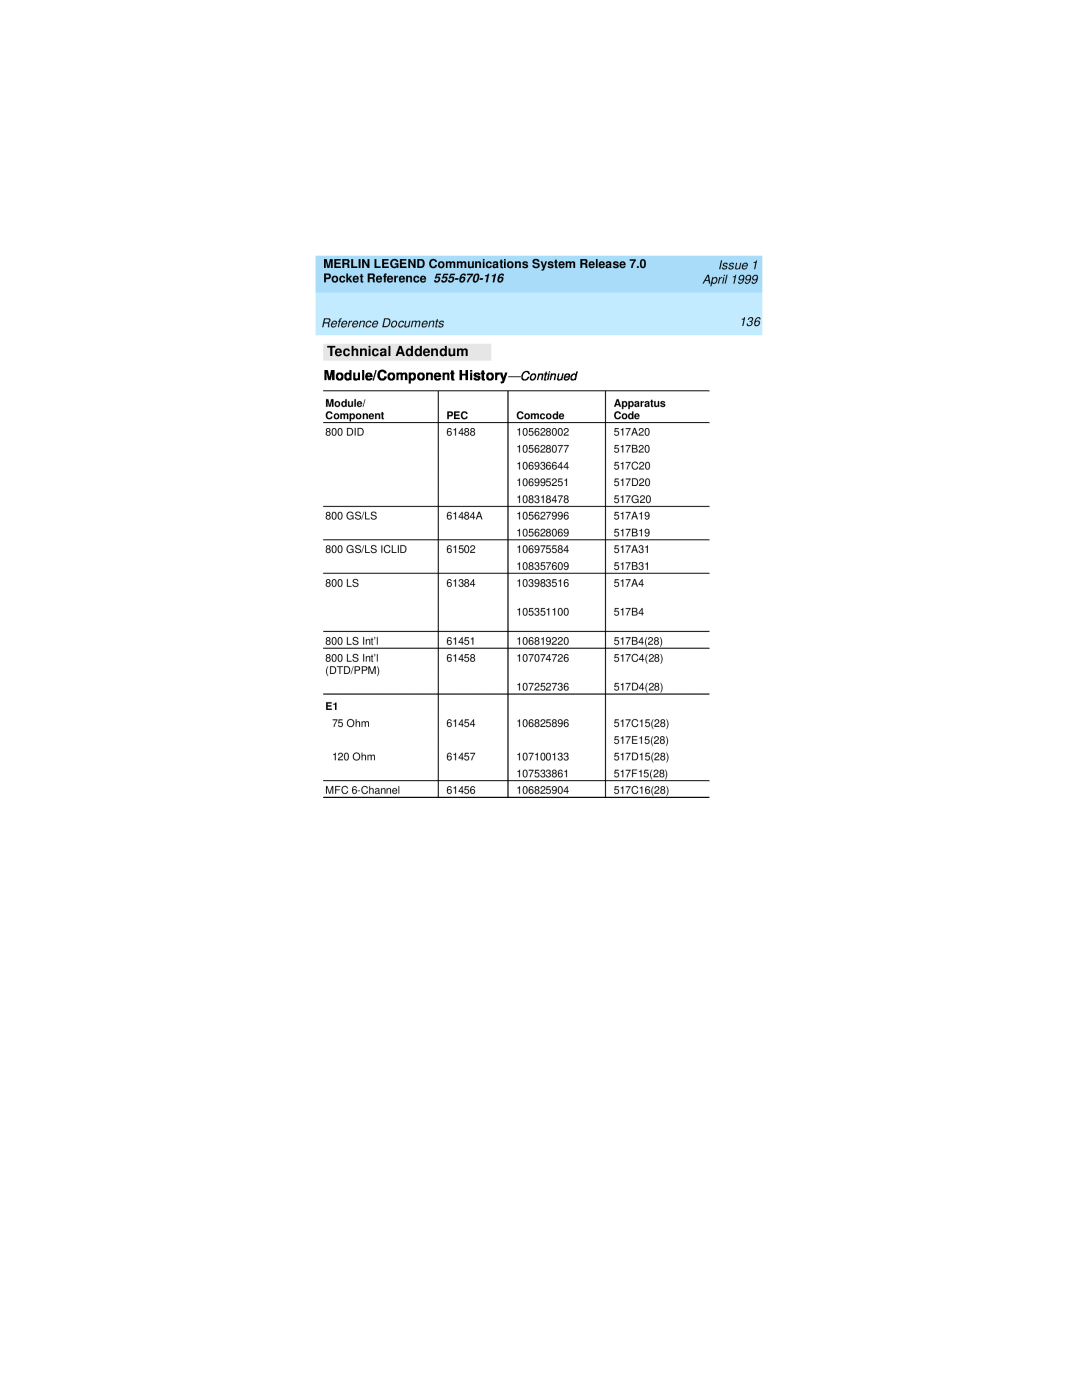 Lucent Technologies 555-670-116 Technical Addendum, Module/Component History-Continued, Issue, Pocket Reference, April 